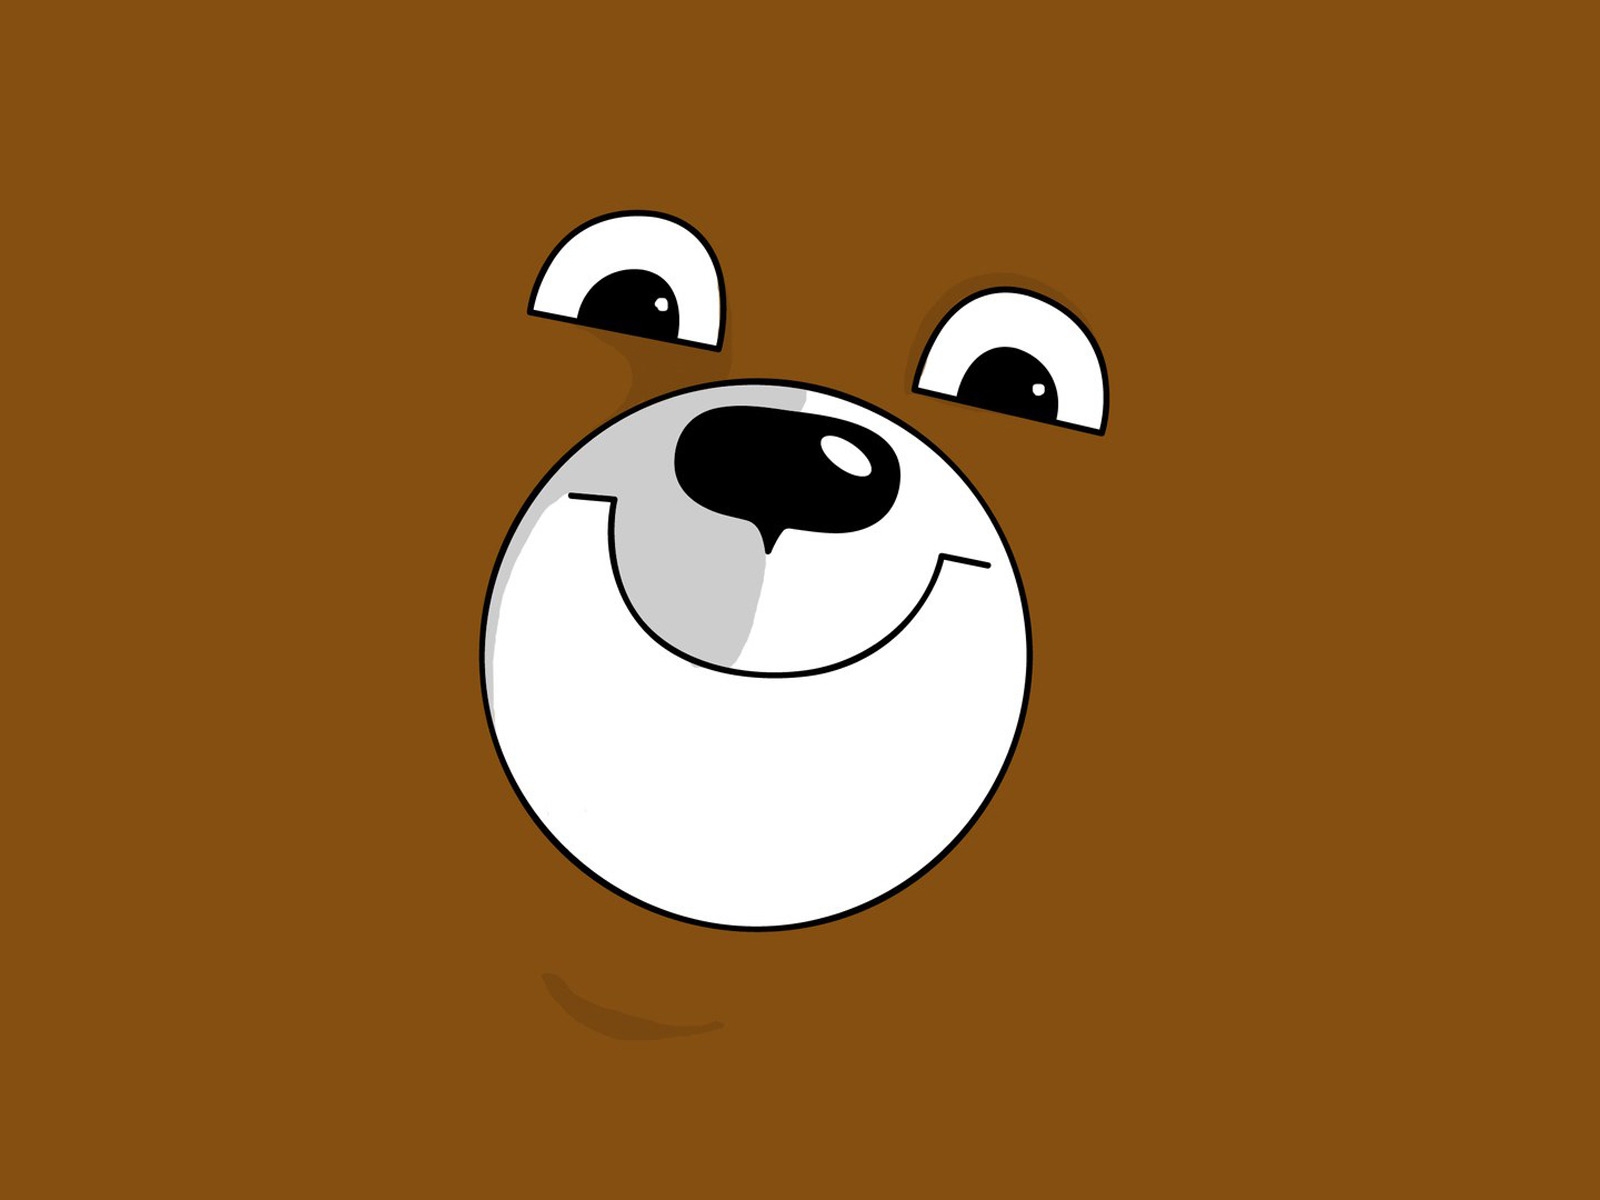 Bear Face for 1600 x 1200 resolution